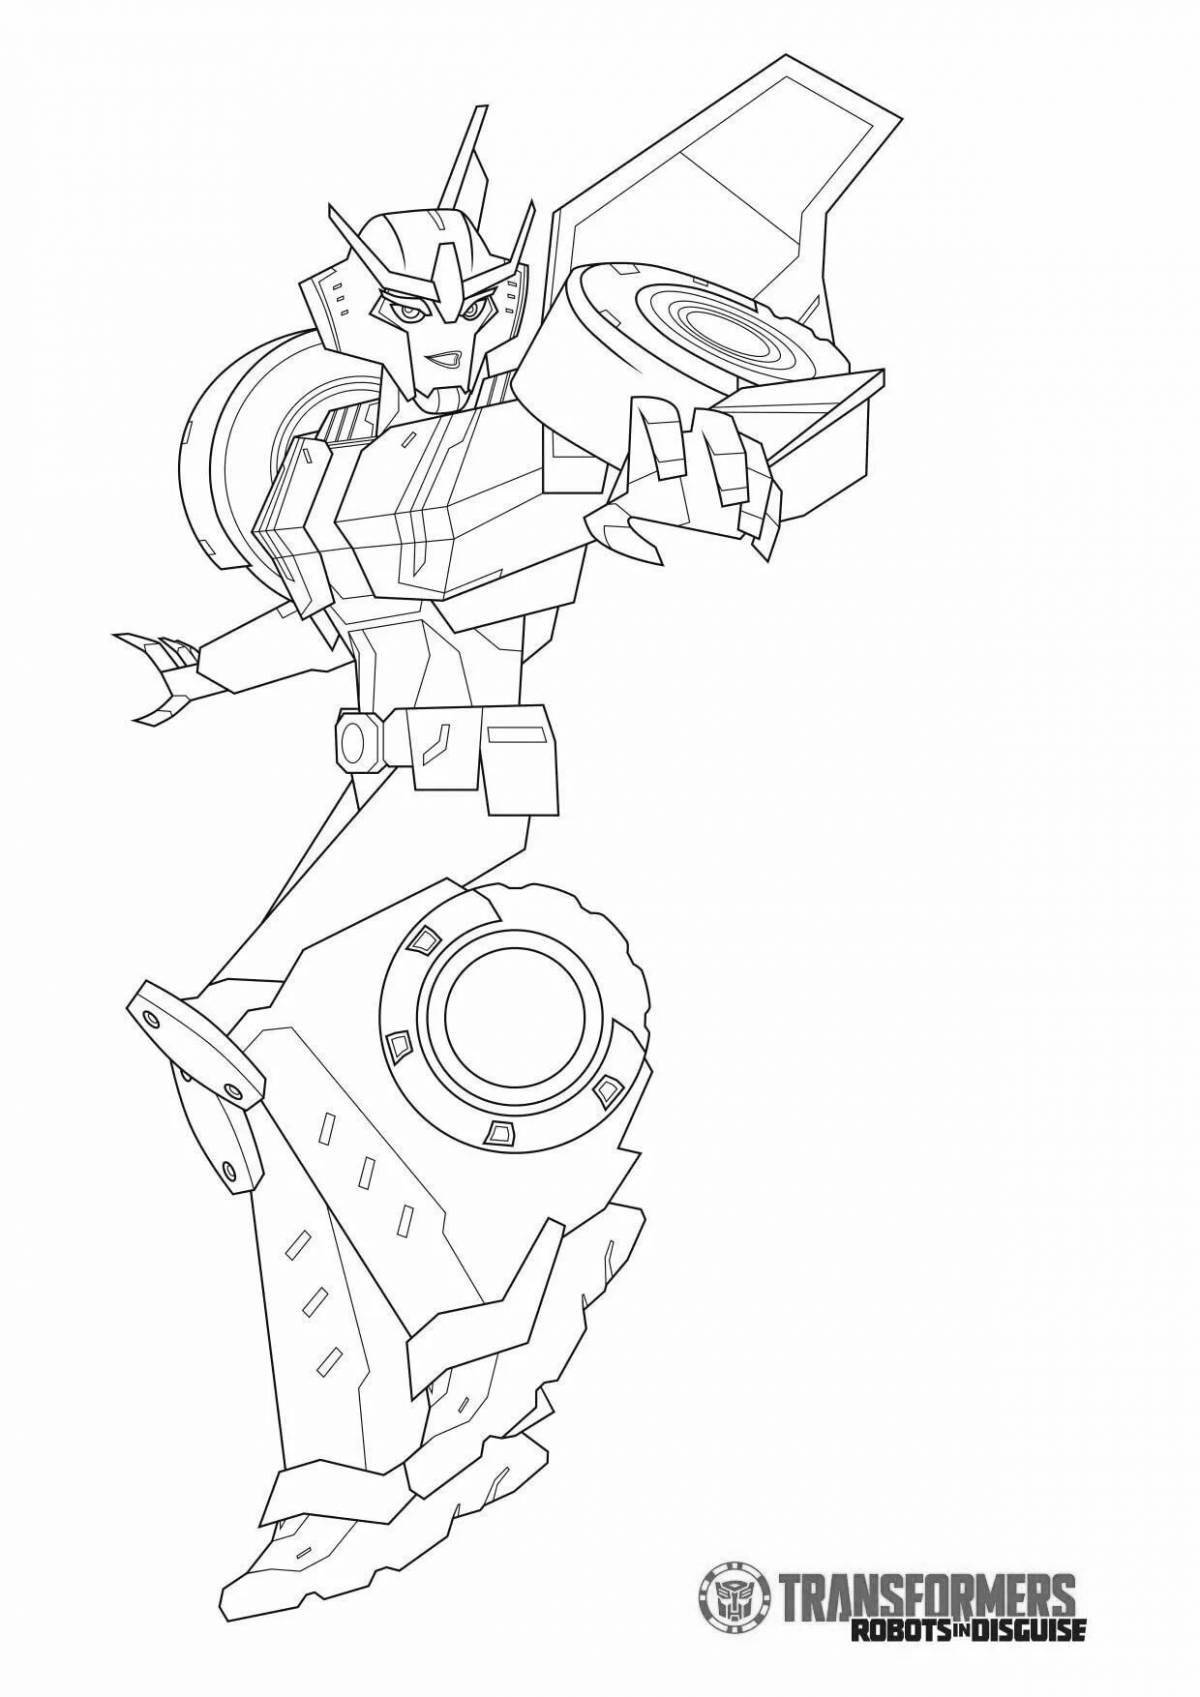 Amazing transformers sideswipe coloring pages